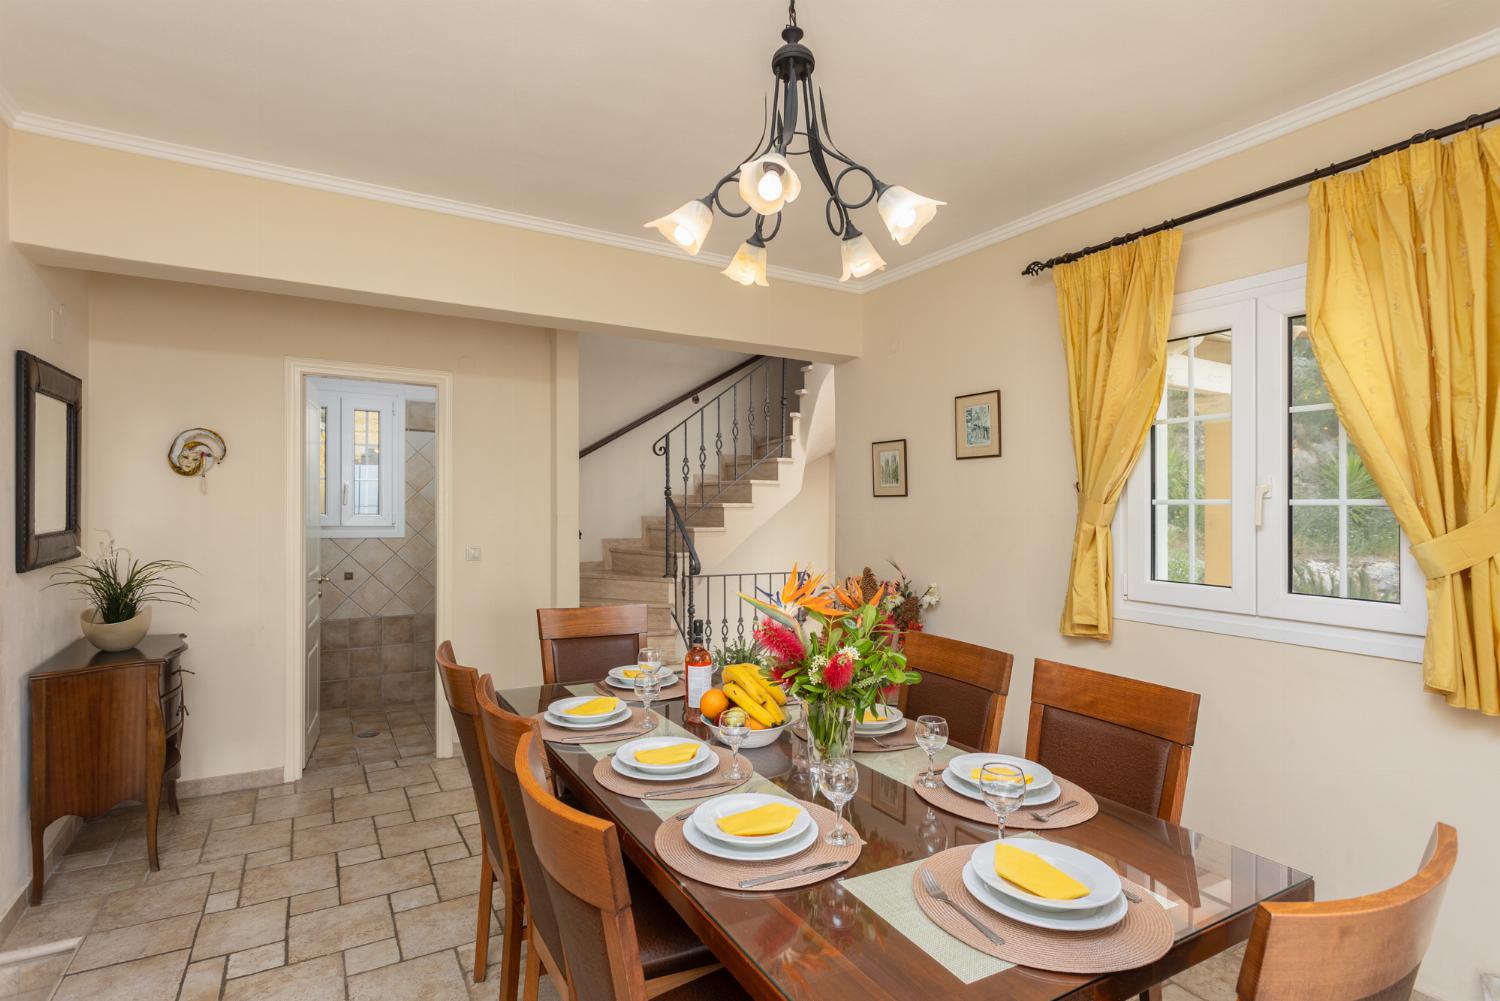 Dining room on first floor with sea views and balcony access